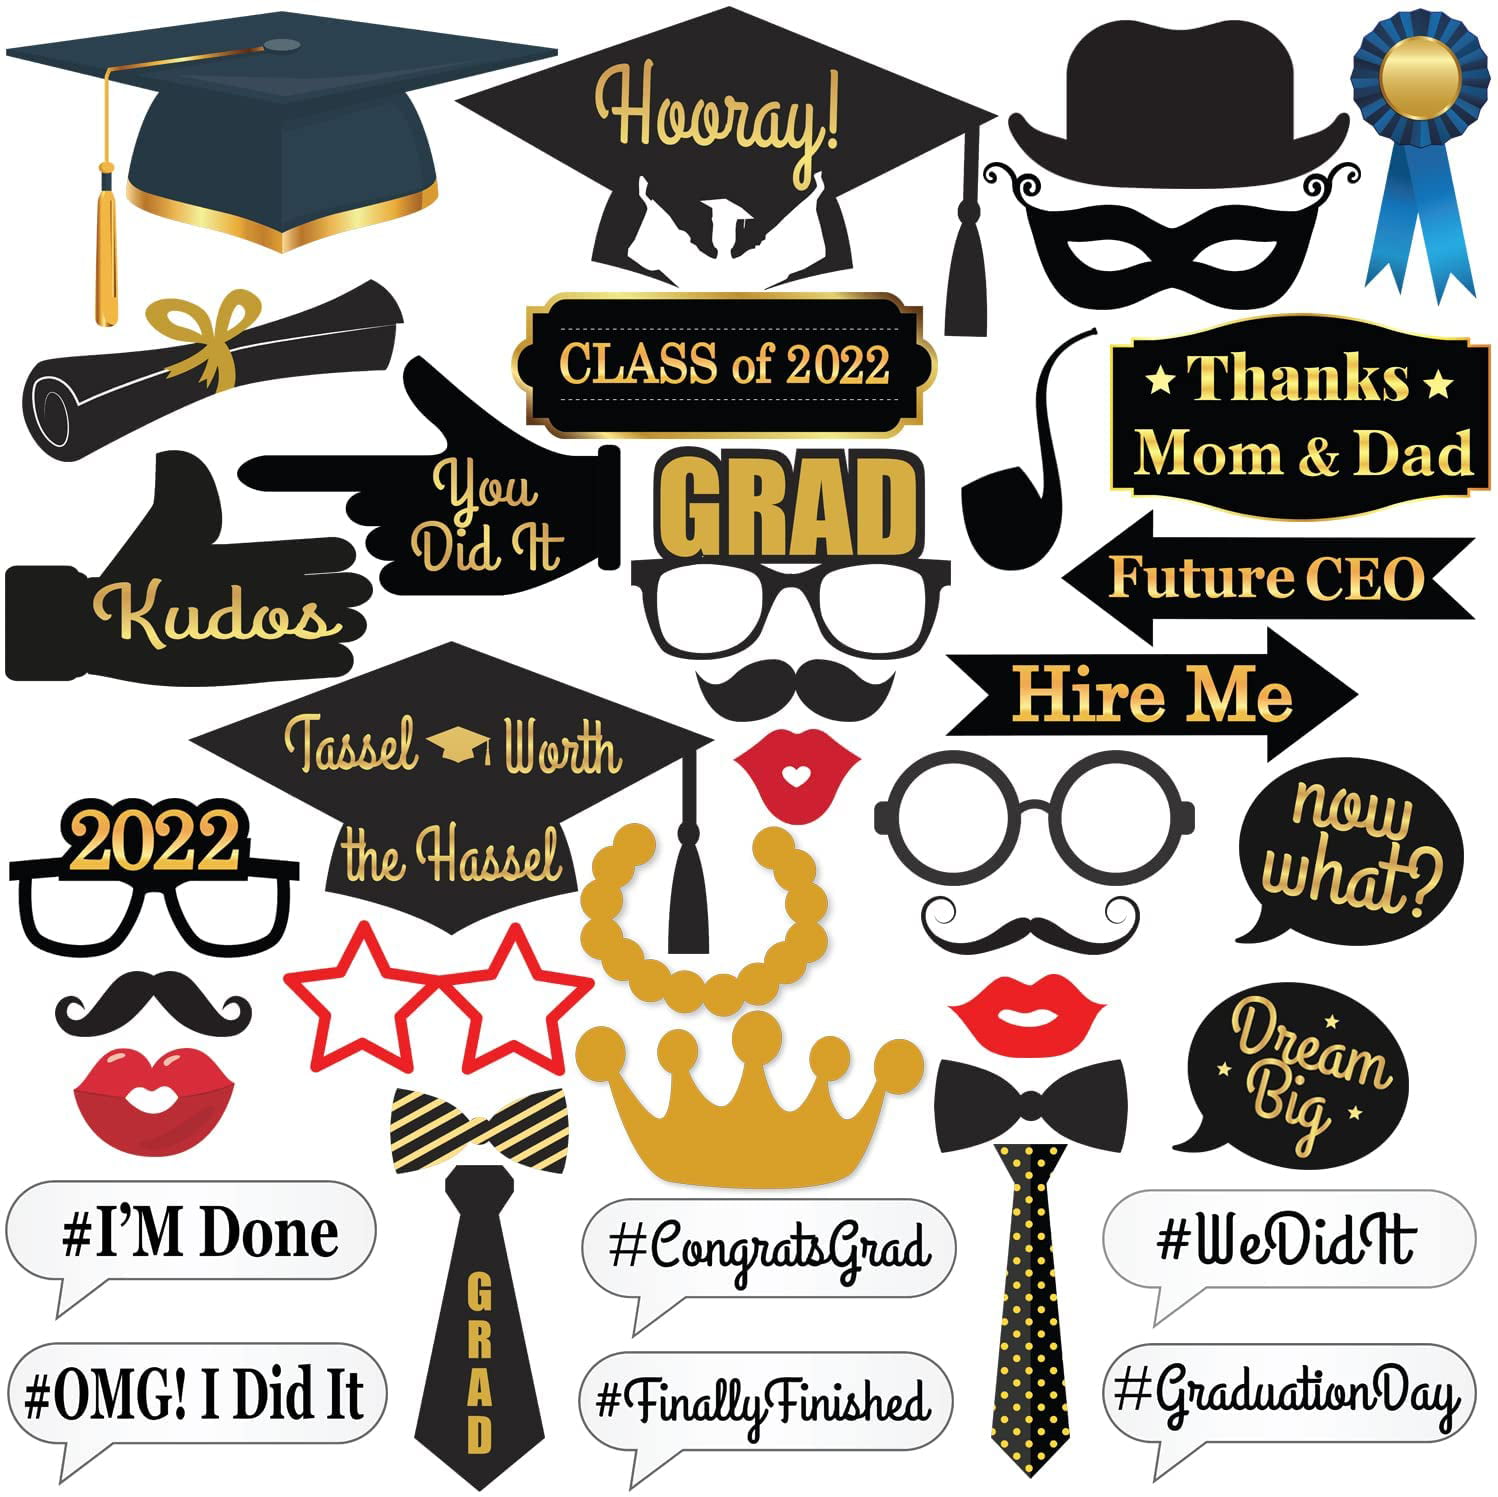 XtraLarge Graduation Photo Booth Props 2022 - Pack of 40 | Graduation Photo  Props for Graduation Party Decorations 2022 | Graduation Party Supplies | Graduation  Props 2022 for Photoshoot, Little DIY - Walmart.com